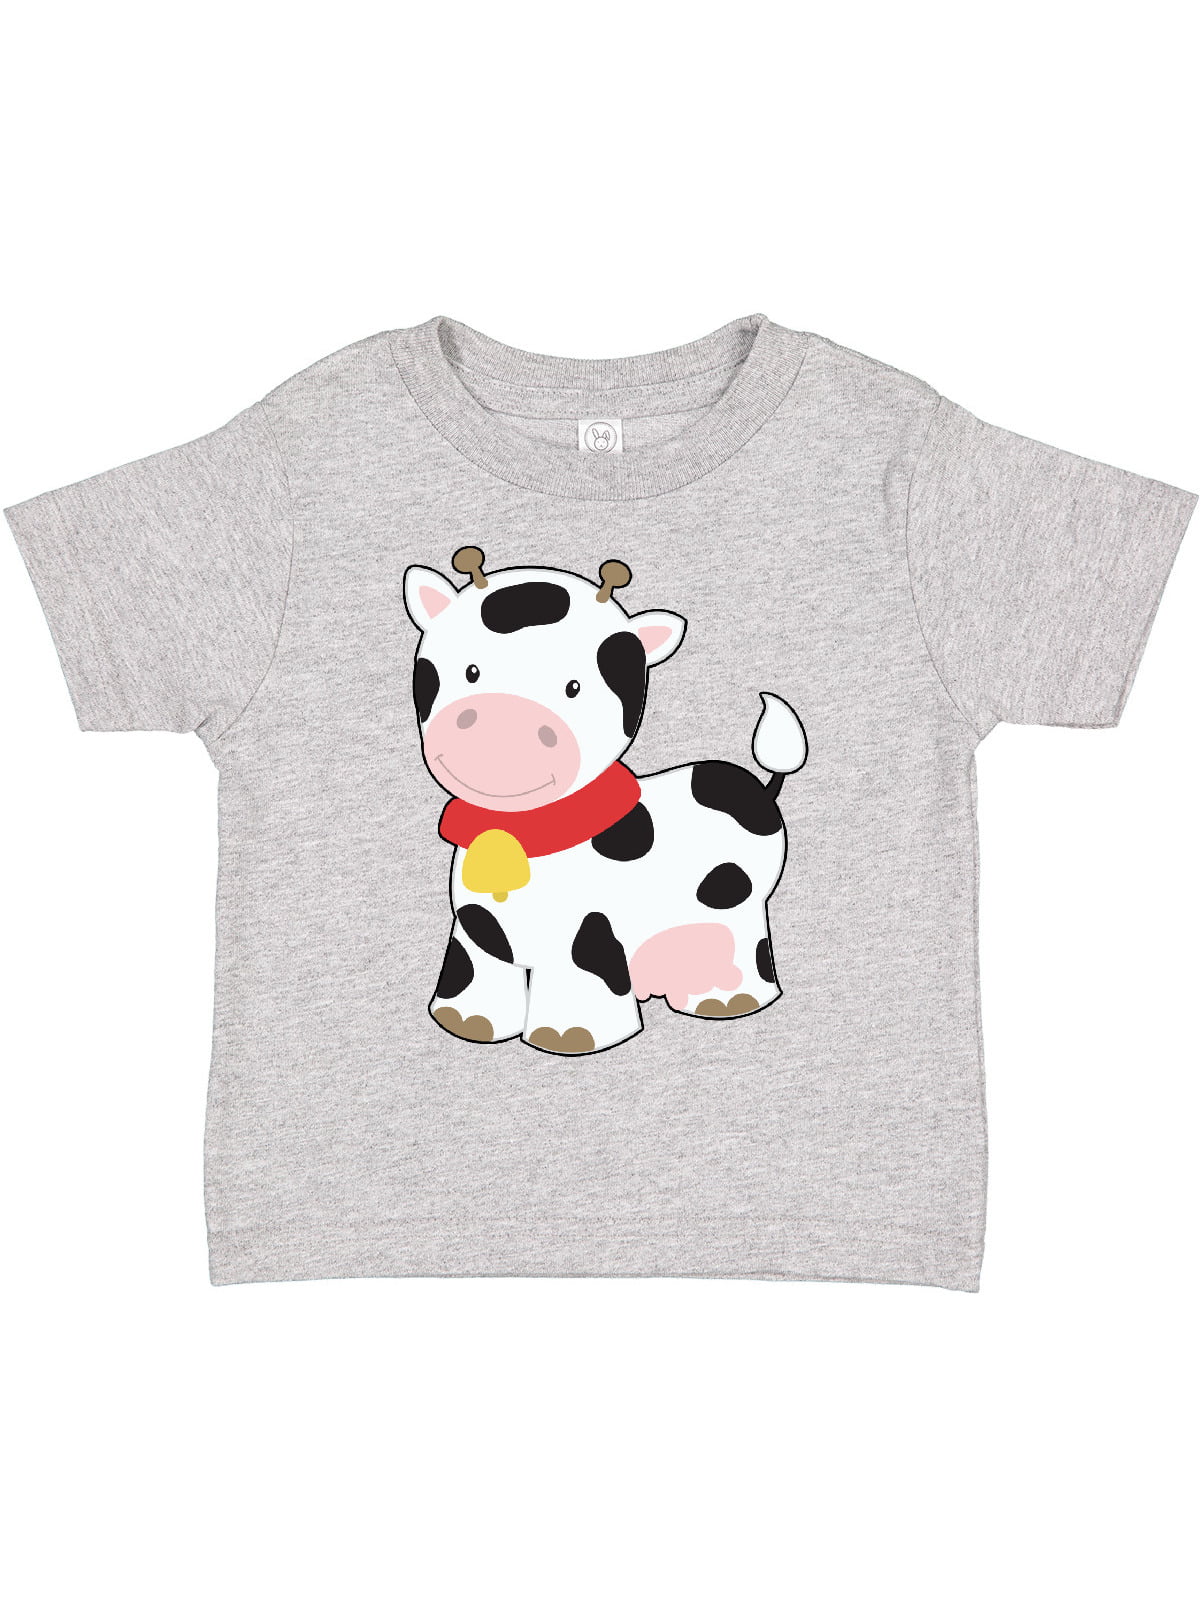 Inktastic Cow Toddler T-Shirt Friendly Farm Animal With Bell Gift Child Kid 